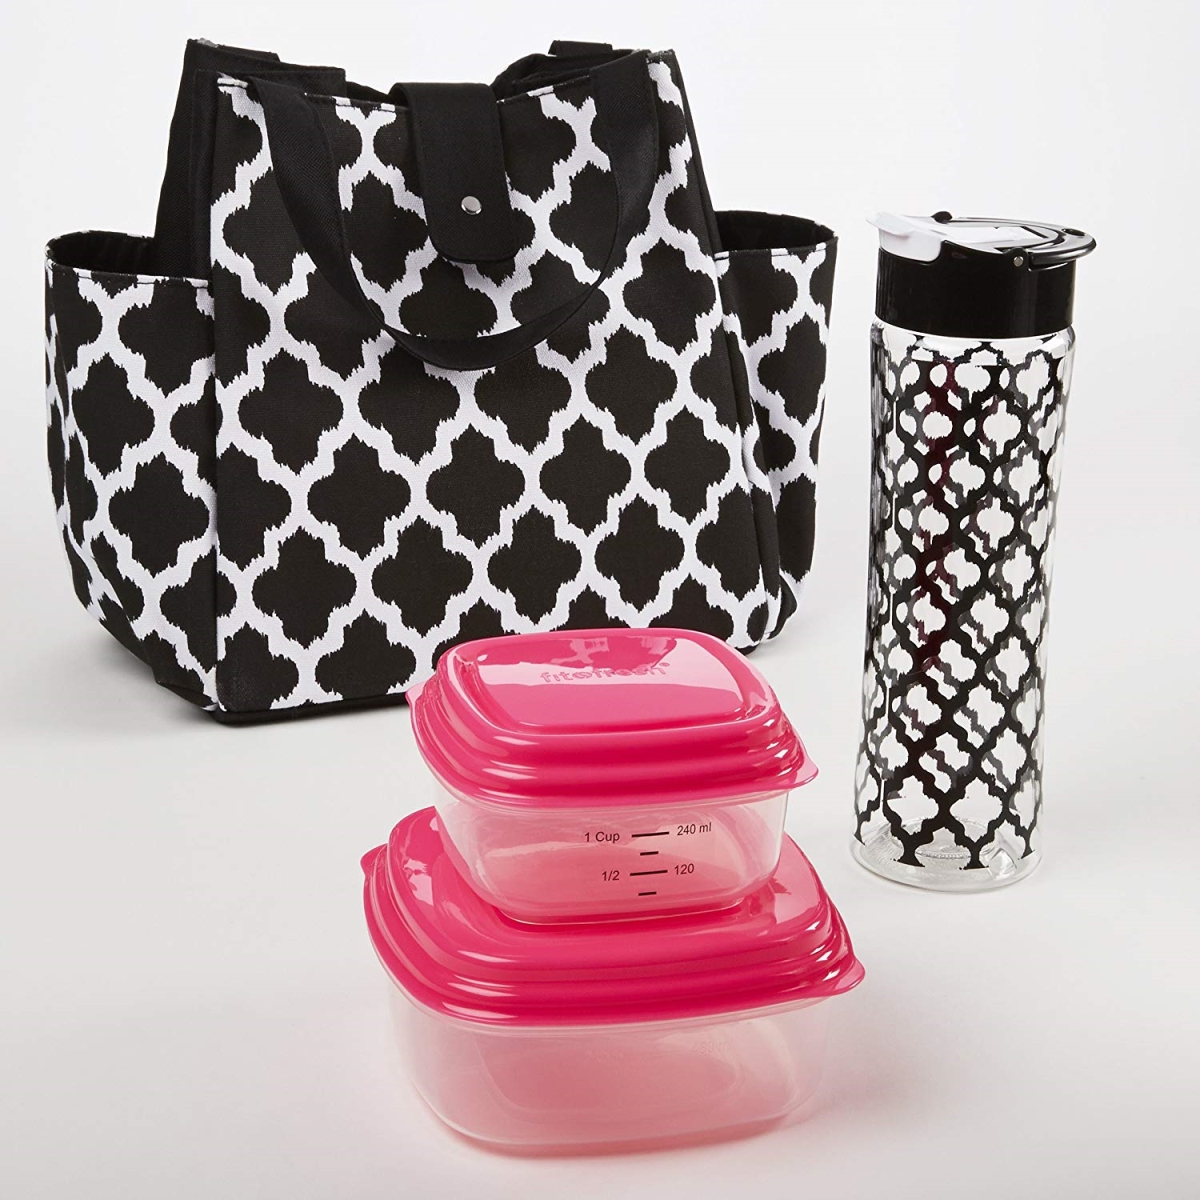 989ff456 Insulated Designer Lunch Bag Kit With Fresh Selects Container Set & Patterned Water Bottle